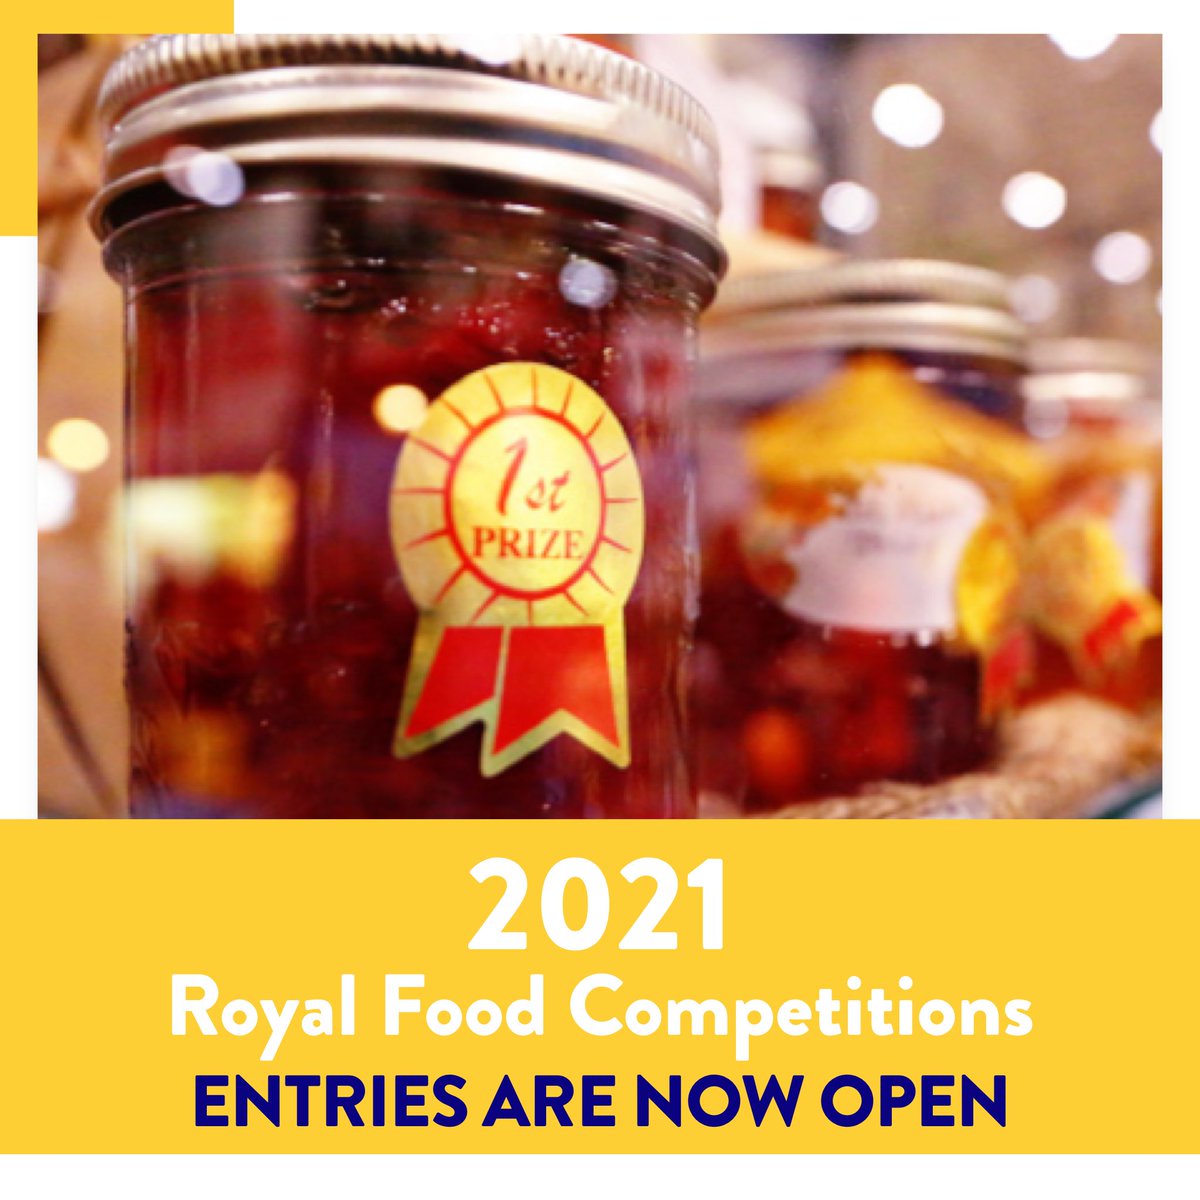 The 2021 Food Competition entries are now OPEN for the following competitions: Butter Tarts Cheese & Butter Honey, Beeswax & Mead Hot Sauce Ice Cream Jams & Jellies Maple Syrup & Maple Products Pickling Ready-To-Eat Meat Snacks Learn more > royalfair.org/agriculture/ex…